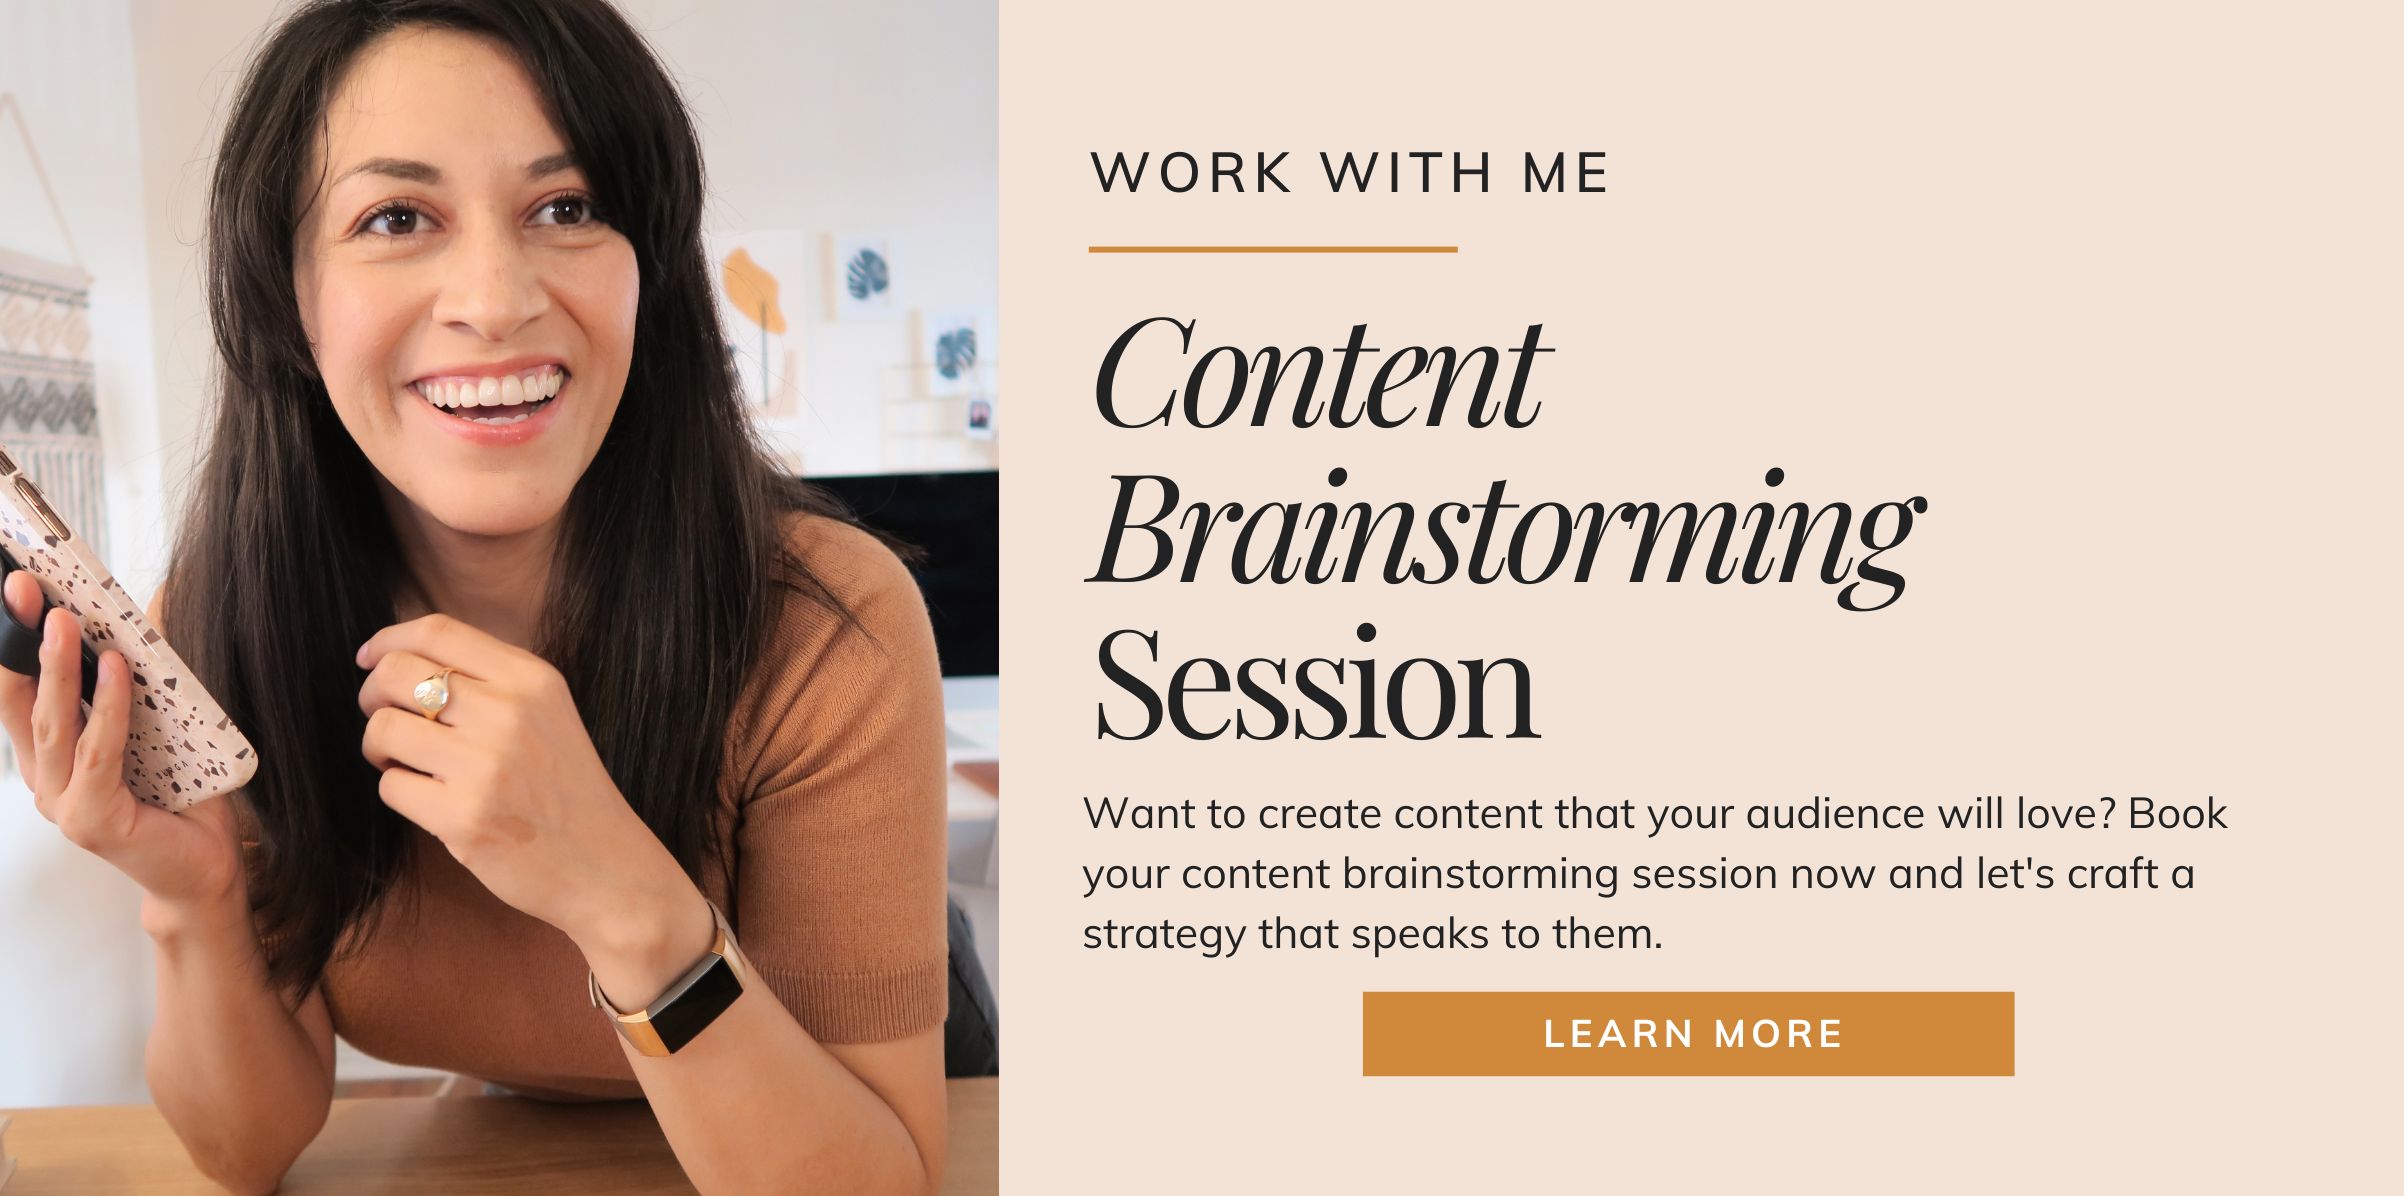 Need help developing a content plan that will drive traffic and engagement? Let's schedule a content brainstorming session and create a strategy that works for you